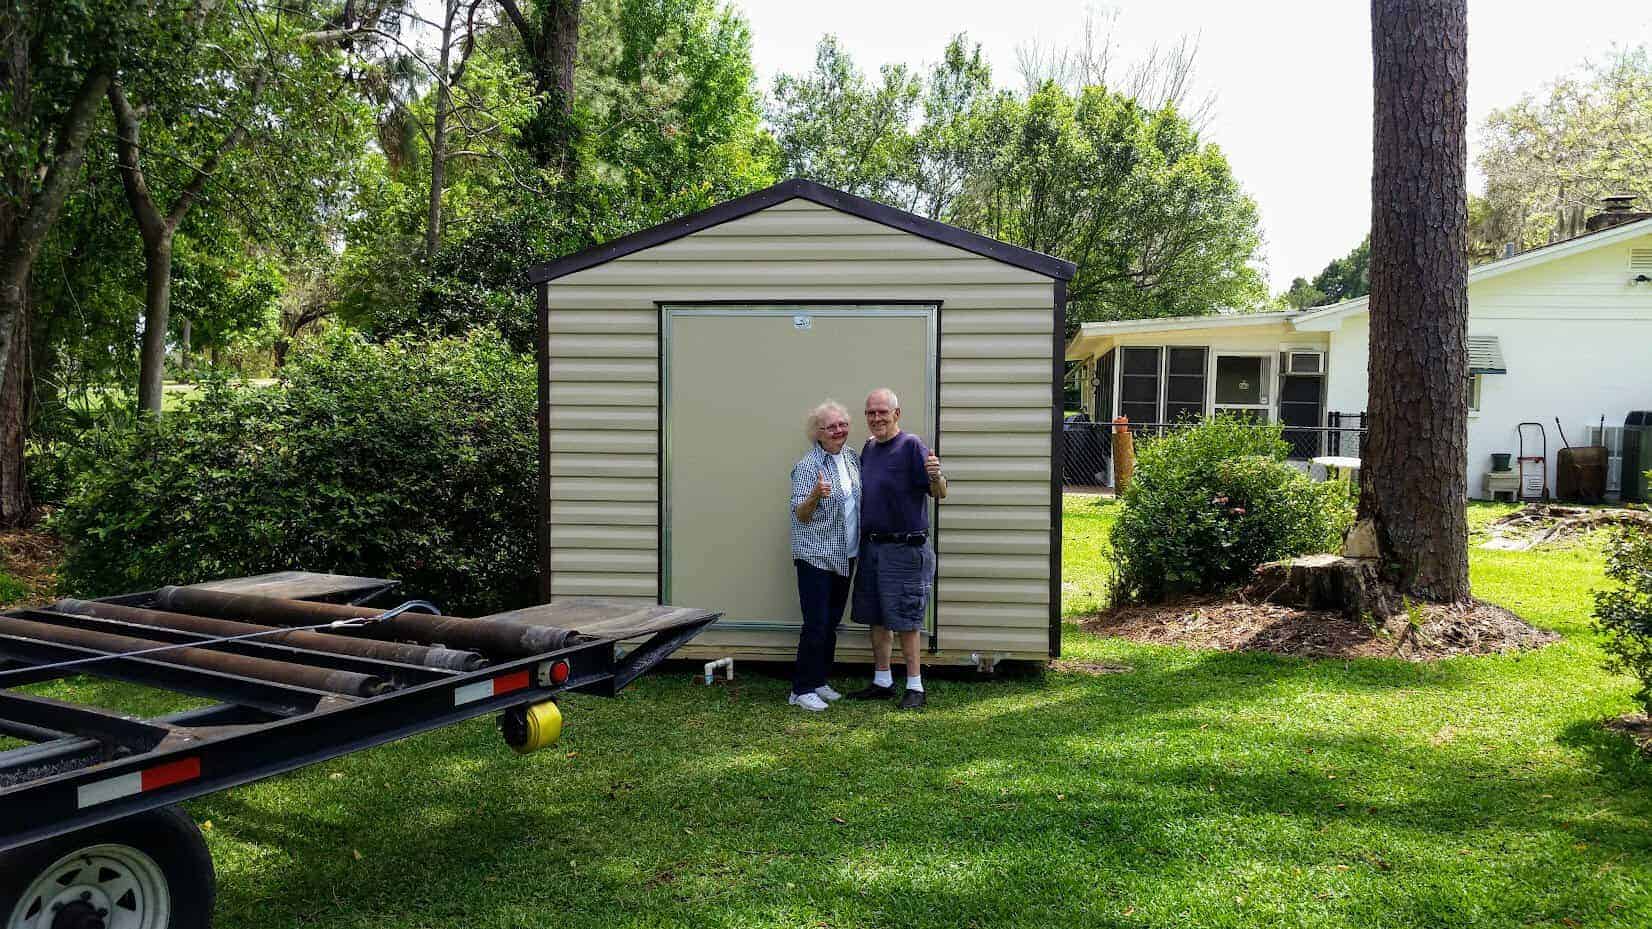 10x16 portable storage shed for sale - Robin Sheds is your go-to dealer for outdoor storage buildings. Check out our 10x16 shed options for reliable and durable storage solutions.